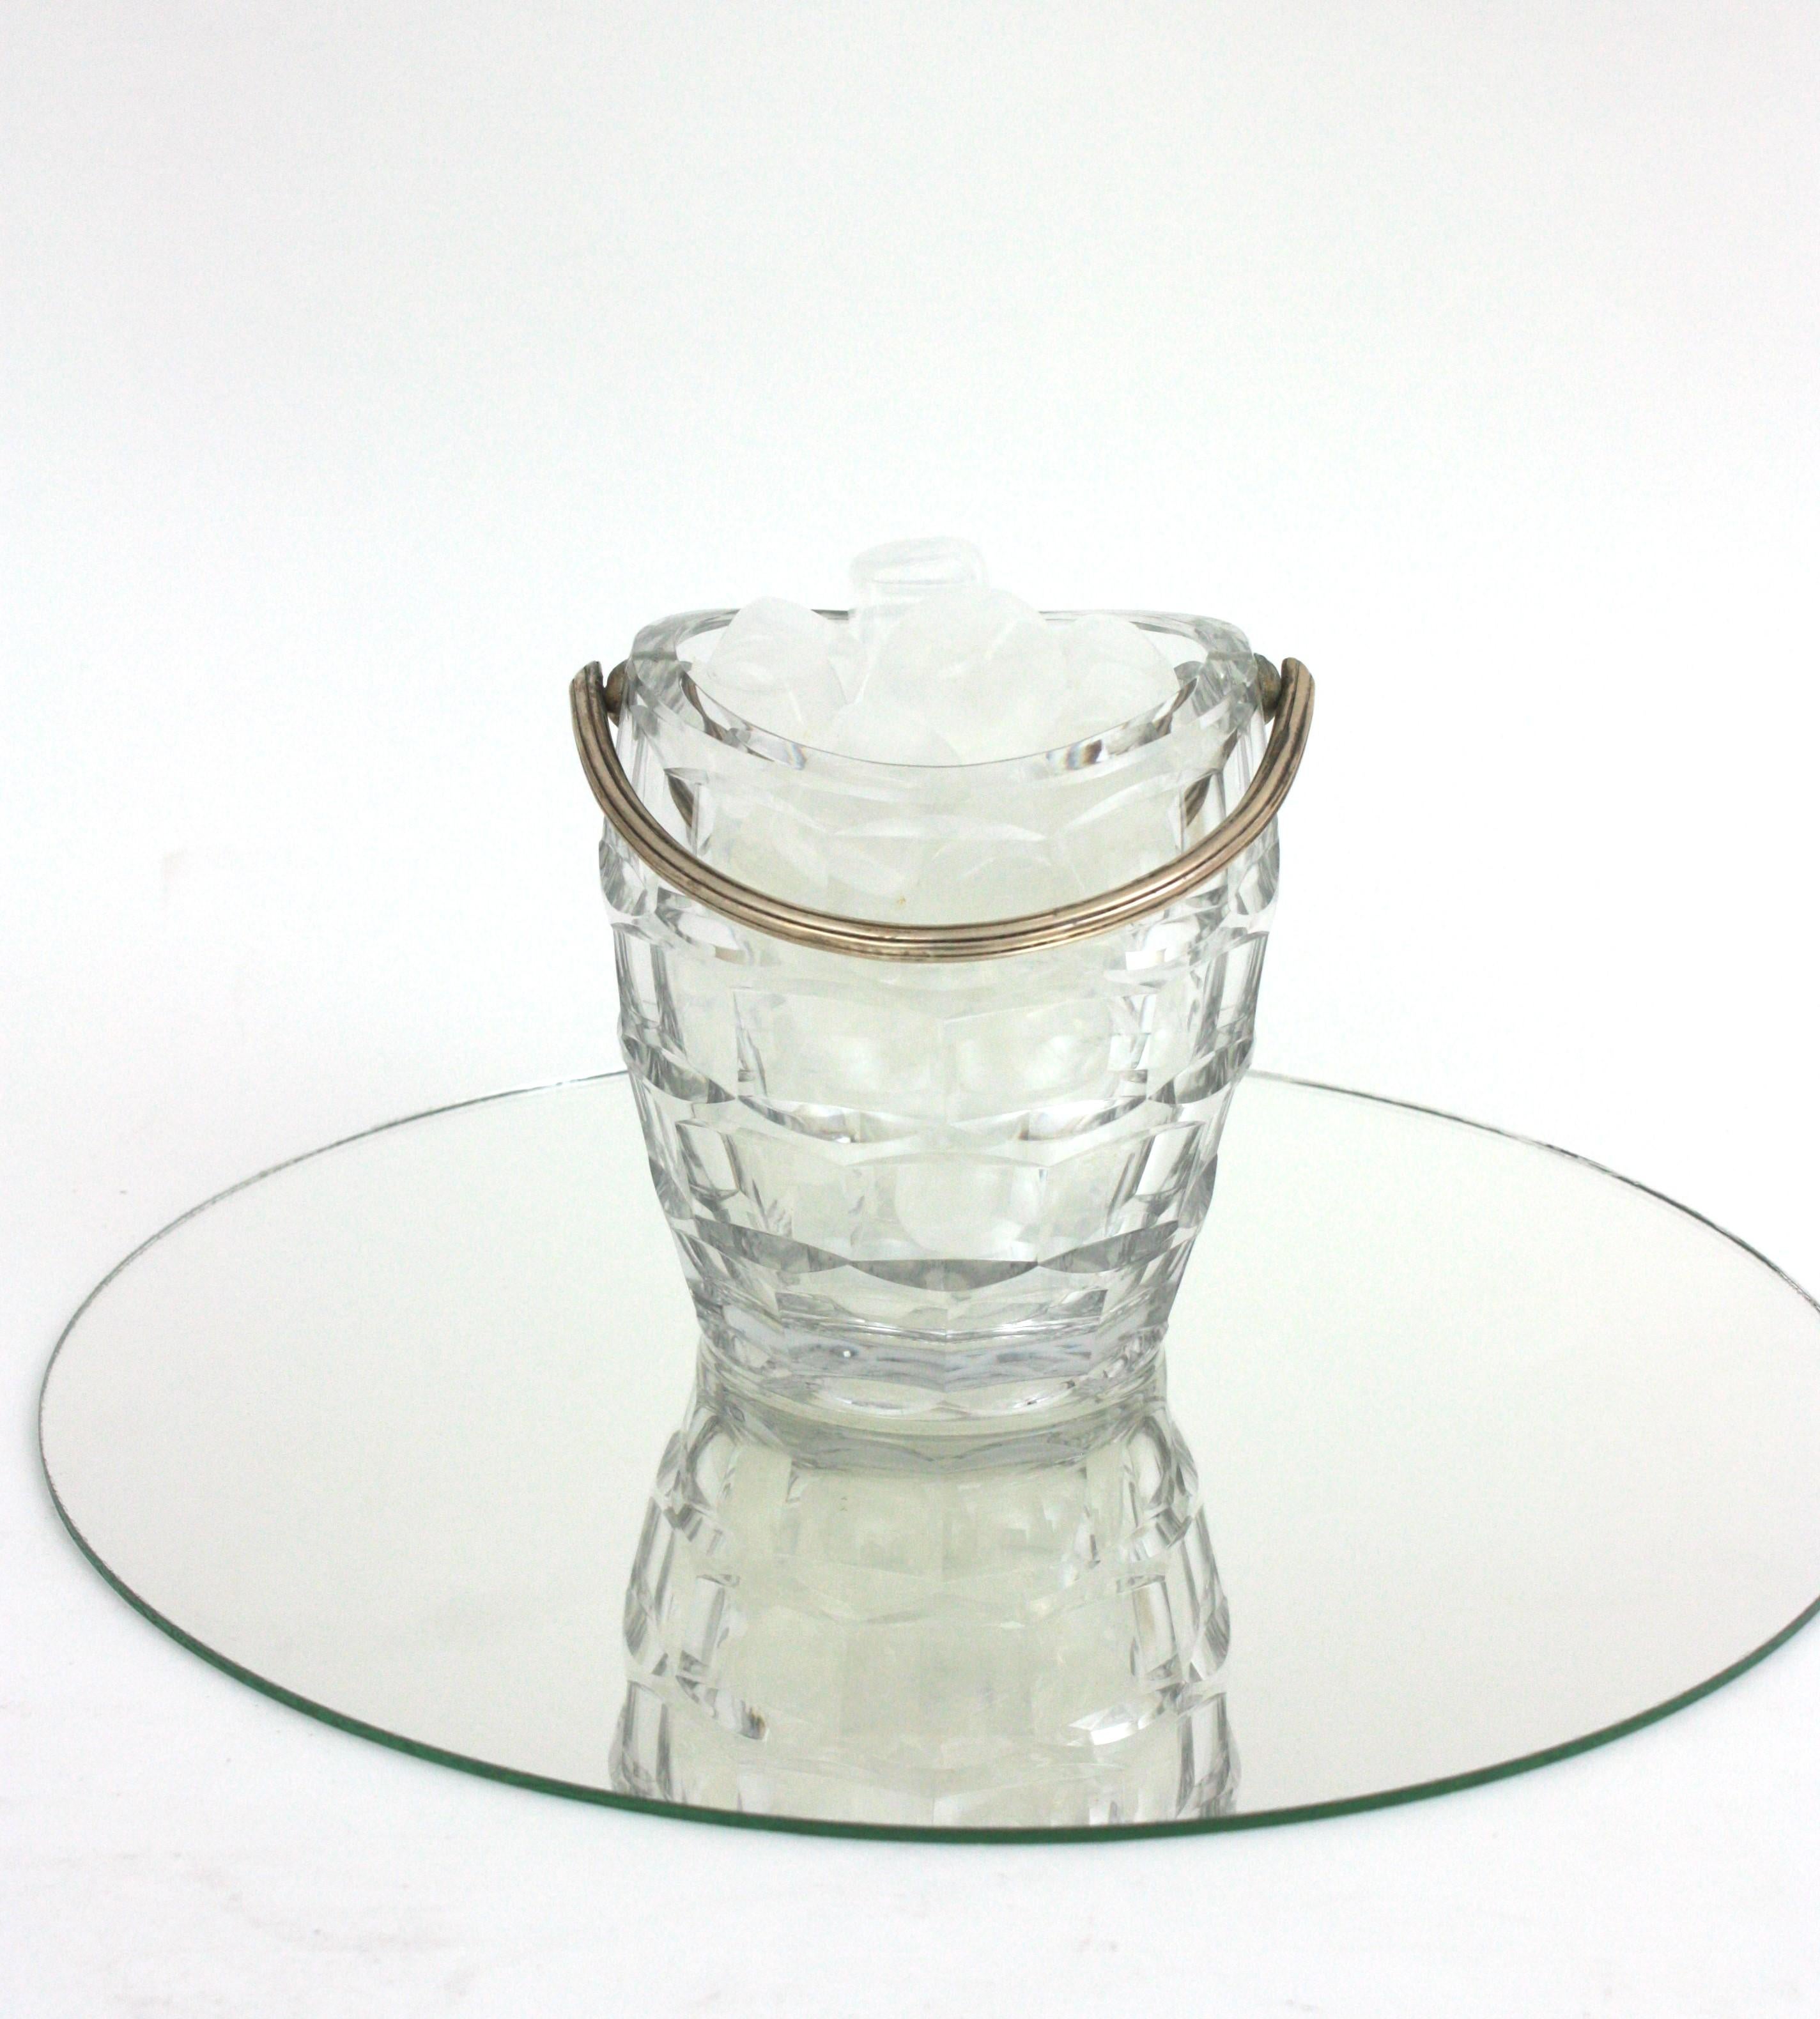 Midcentury Baccarat Cut Crystal and Silver Ice Bucket, 1950s For Sale 6